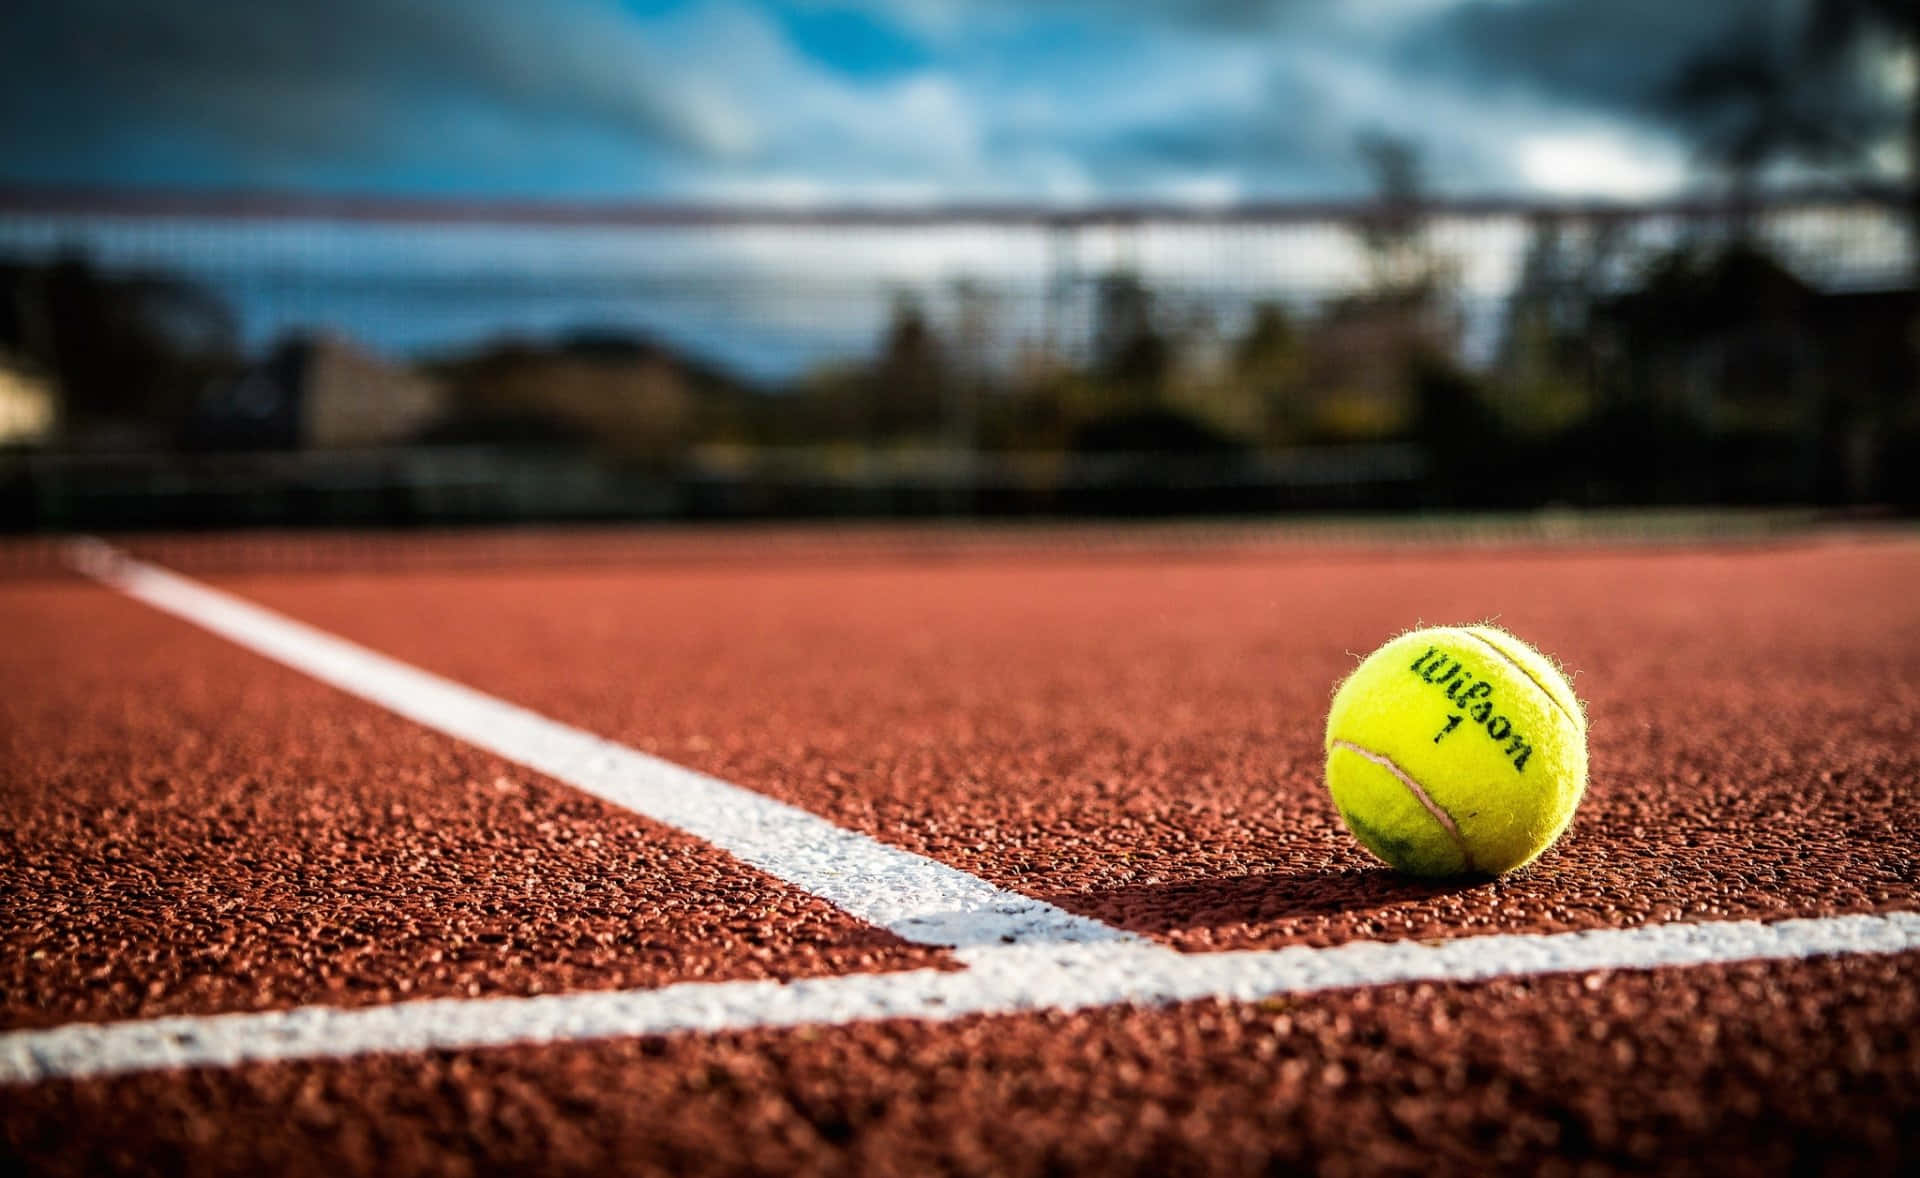 Perfectly crafted tennis ball to enhance your sports experience. Wallpaper